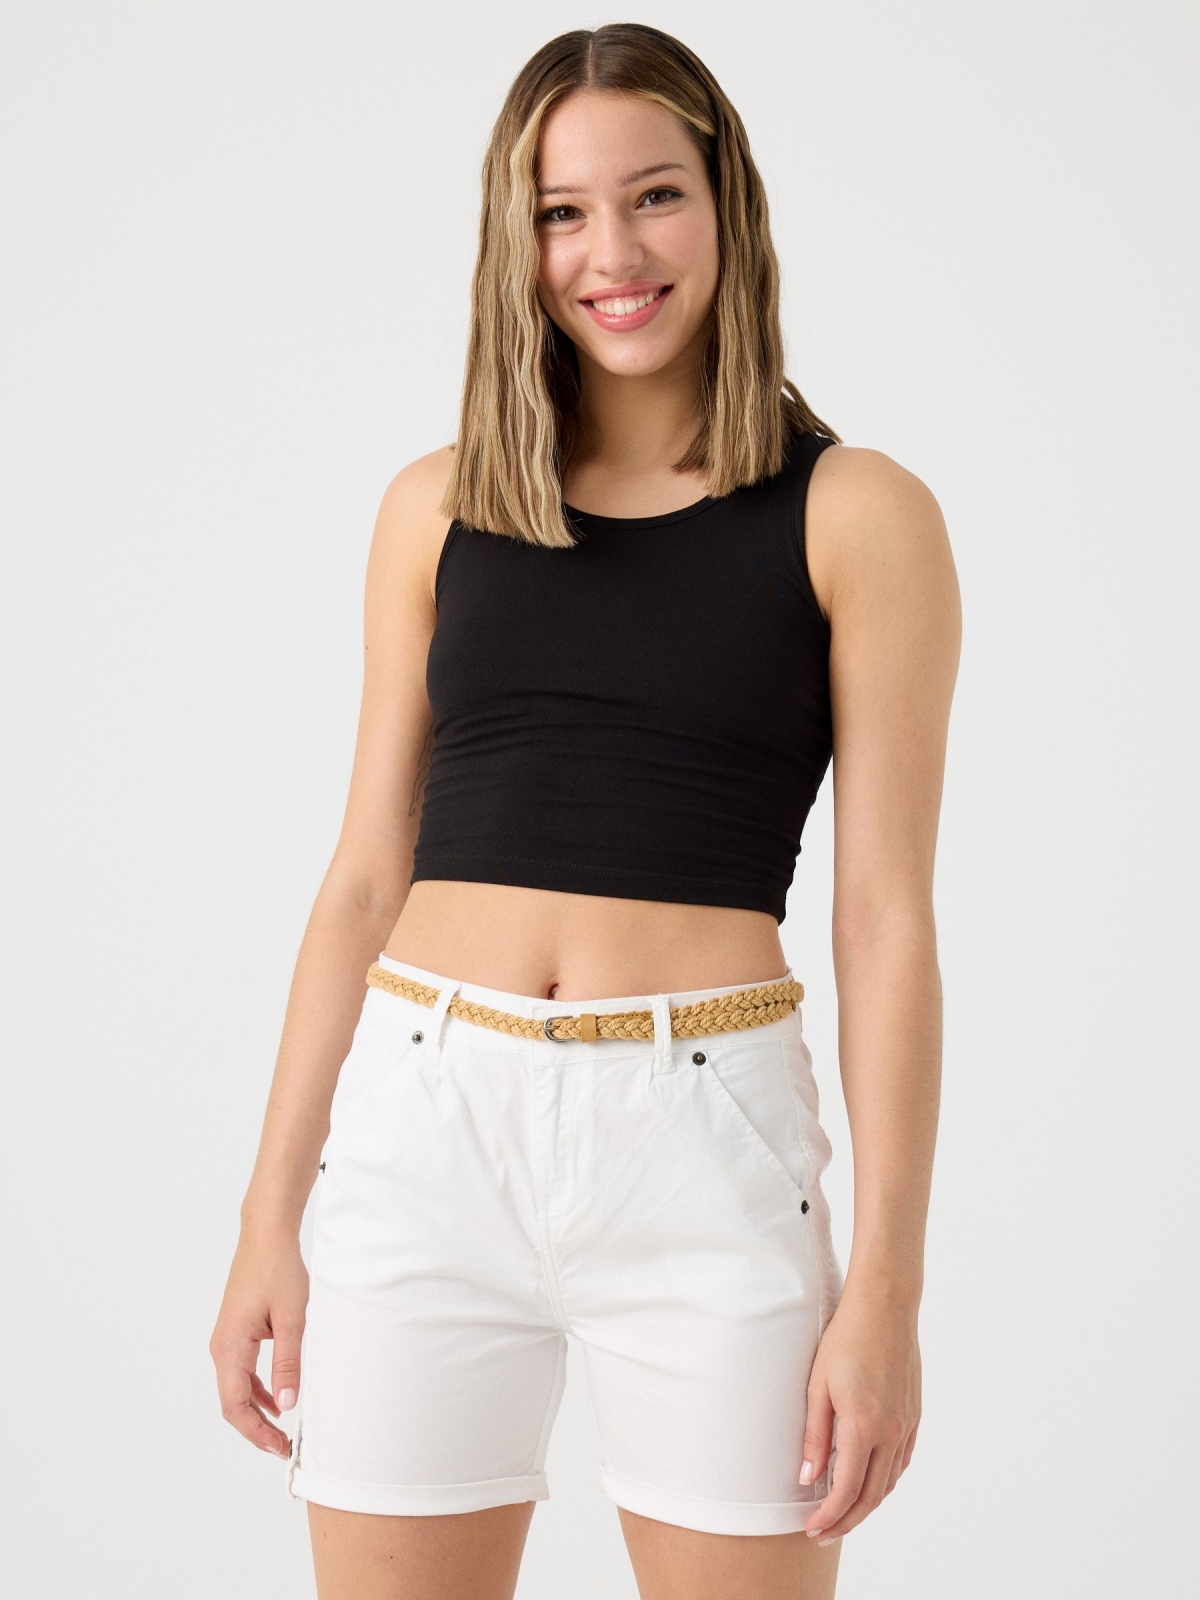 Braided belt shorts white middle front view